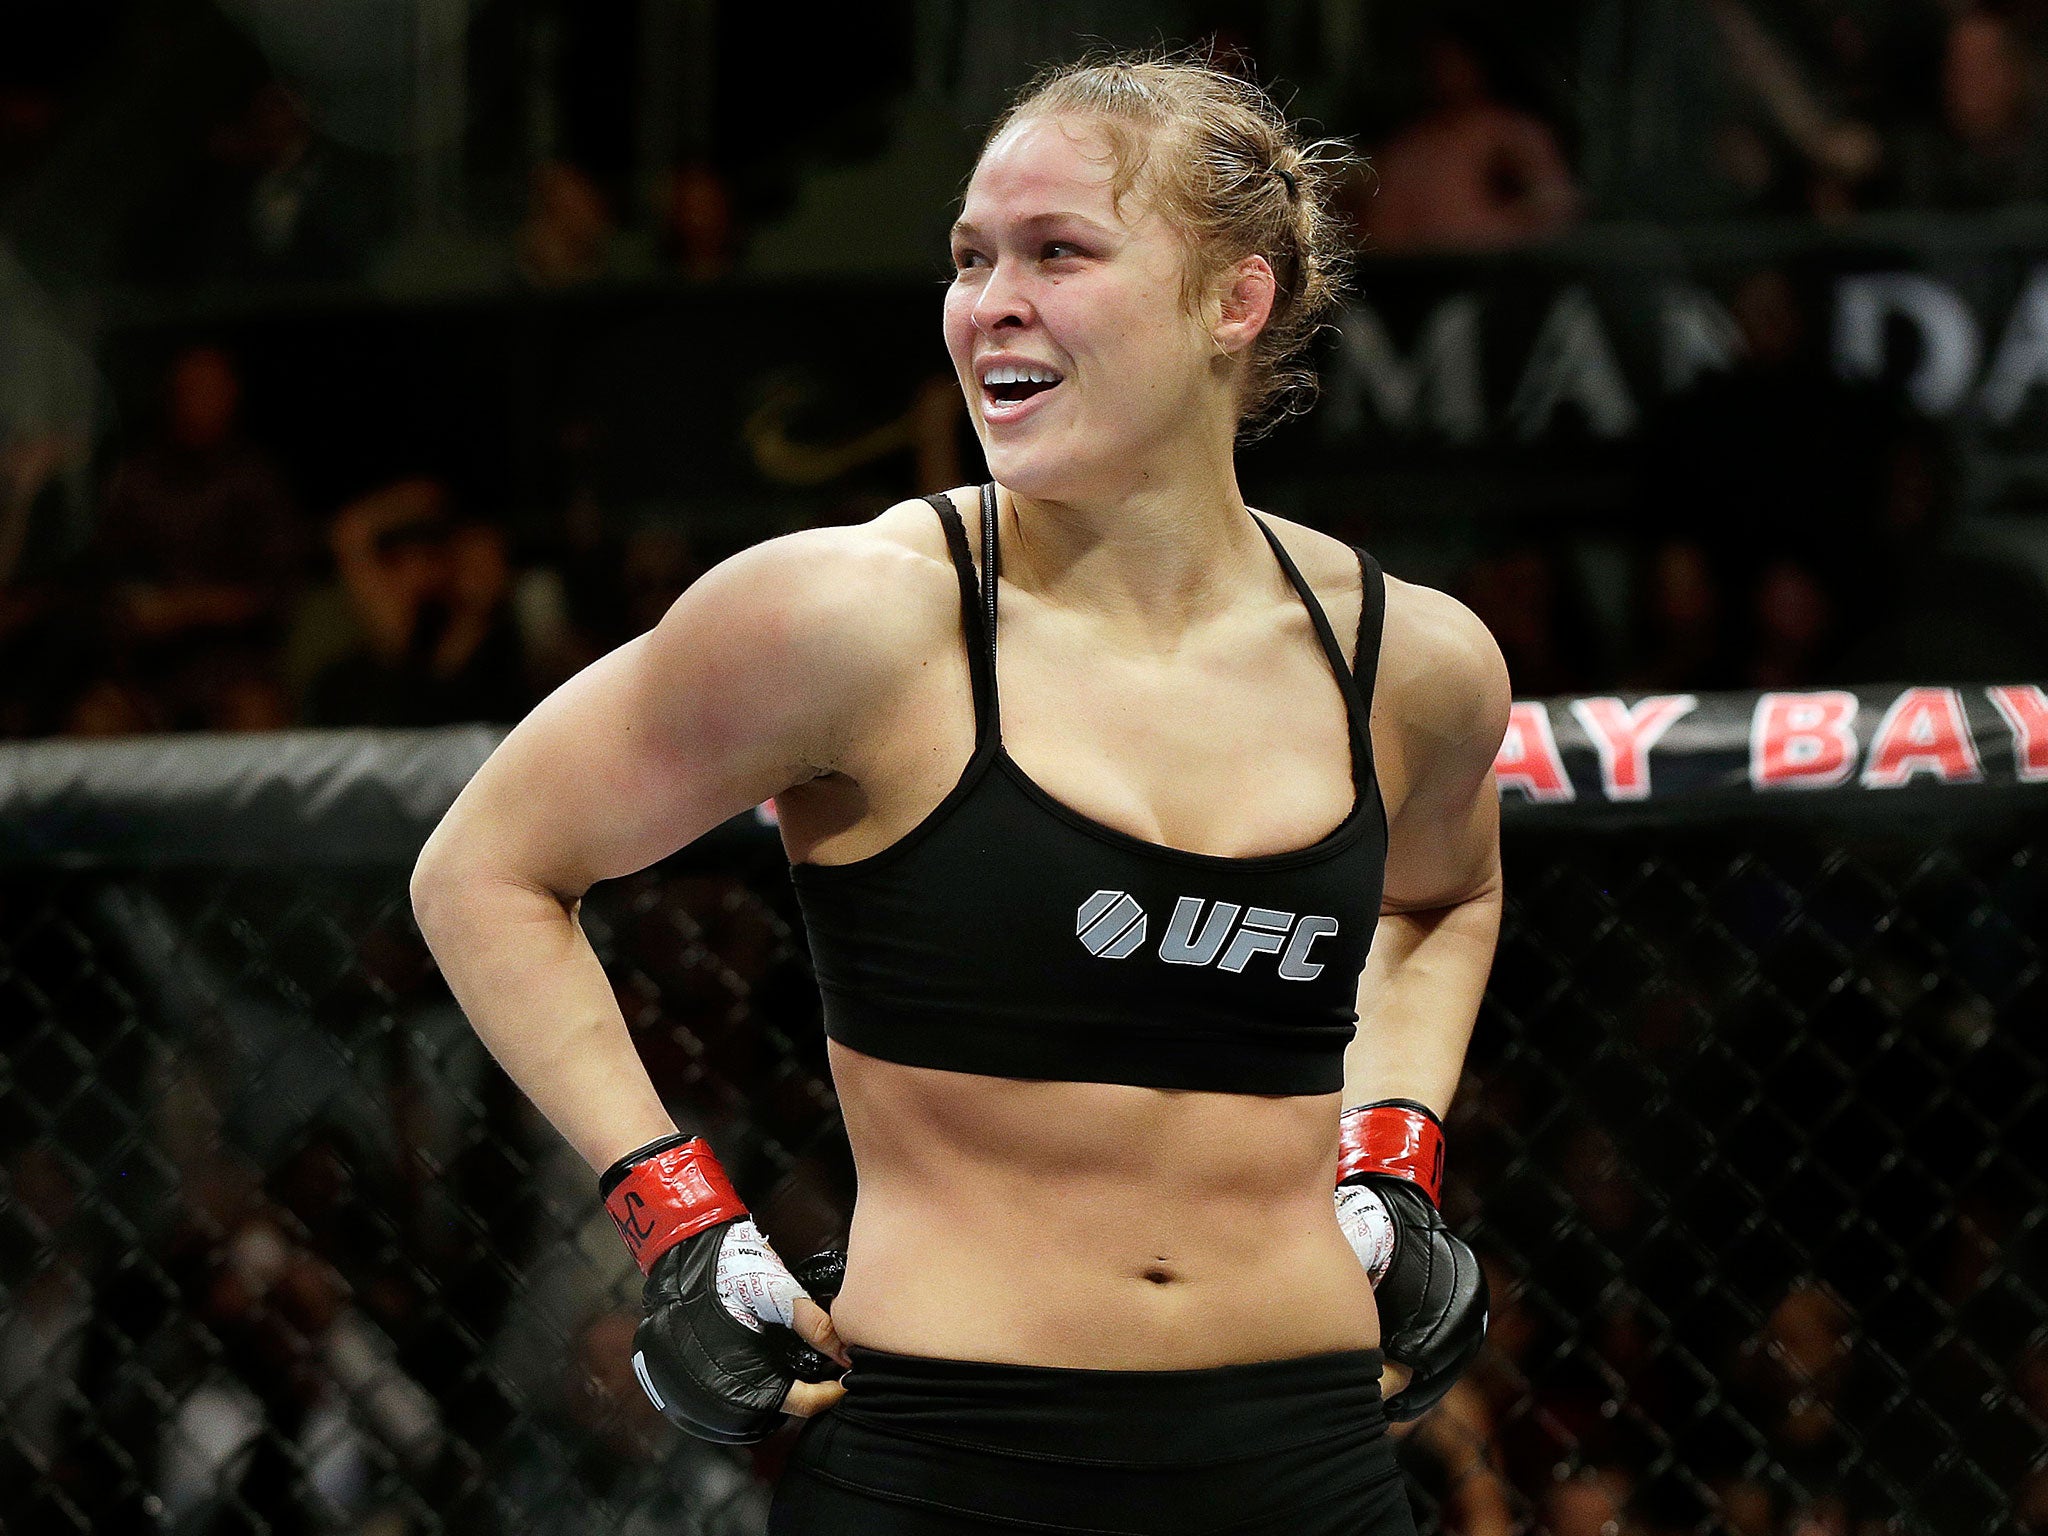 Rousey stands triumphant following her victory against Sara McMann in UFC 170